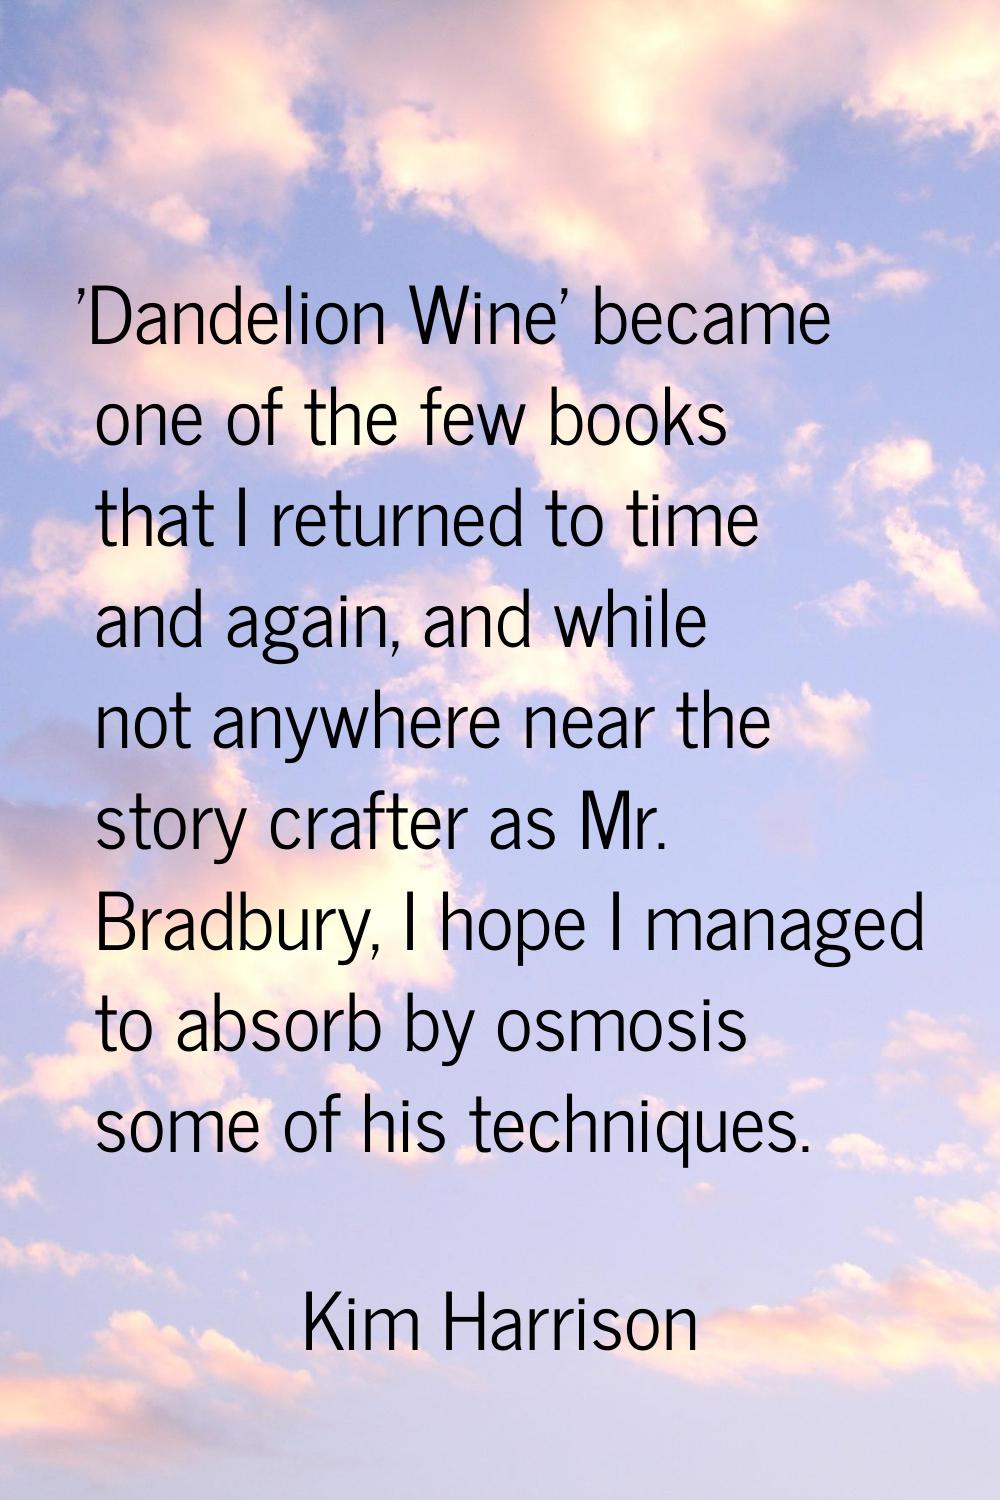 'Dandelion Wine' became one of the few books that I returned to time and again, and while not anywh